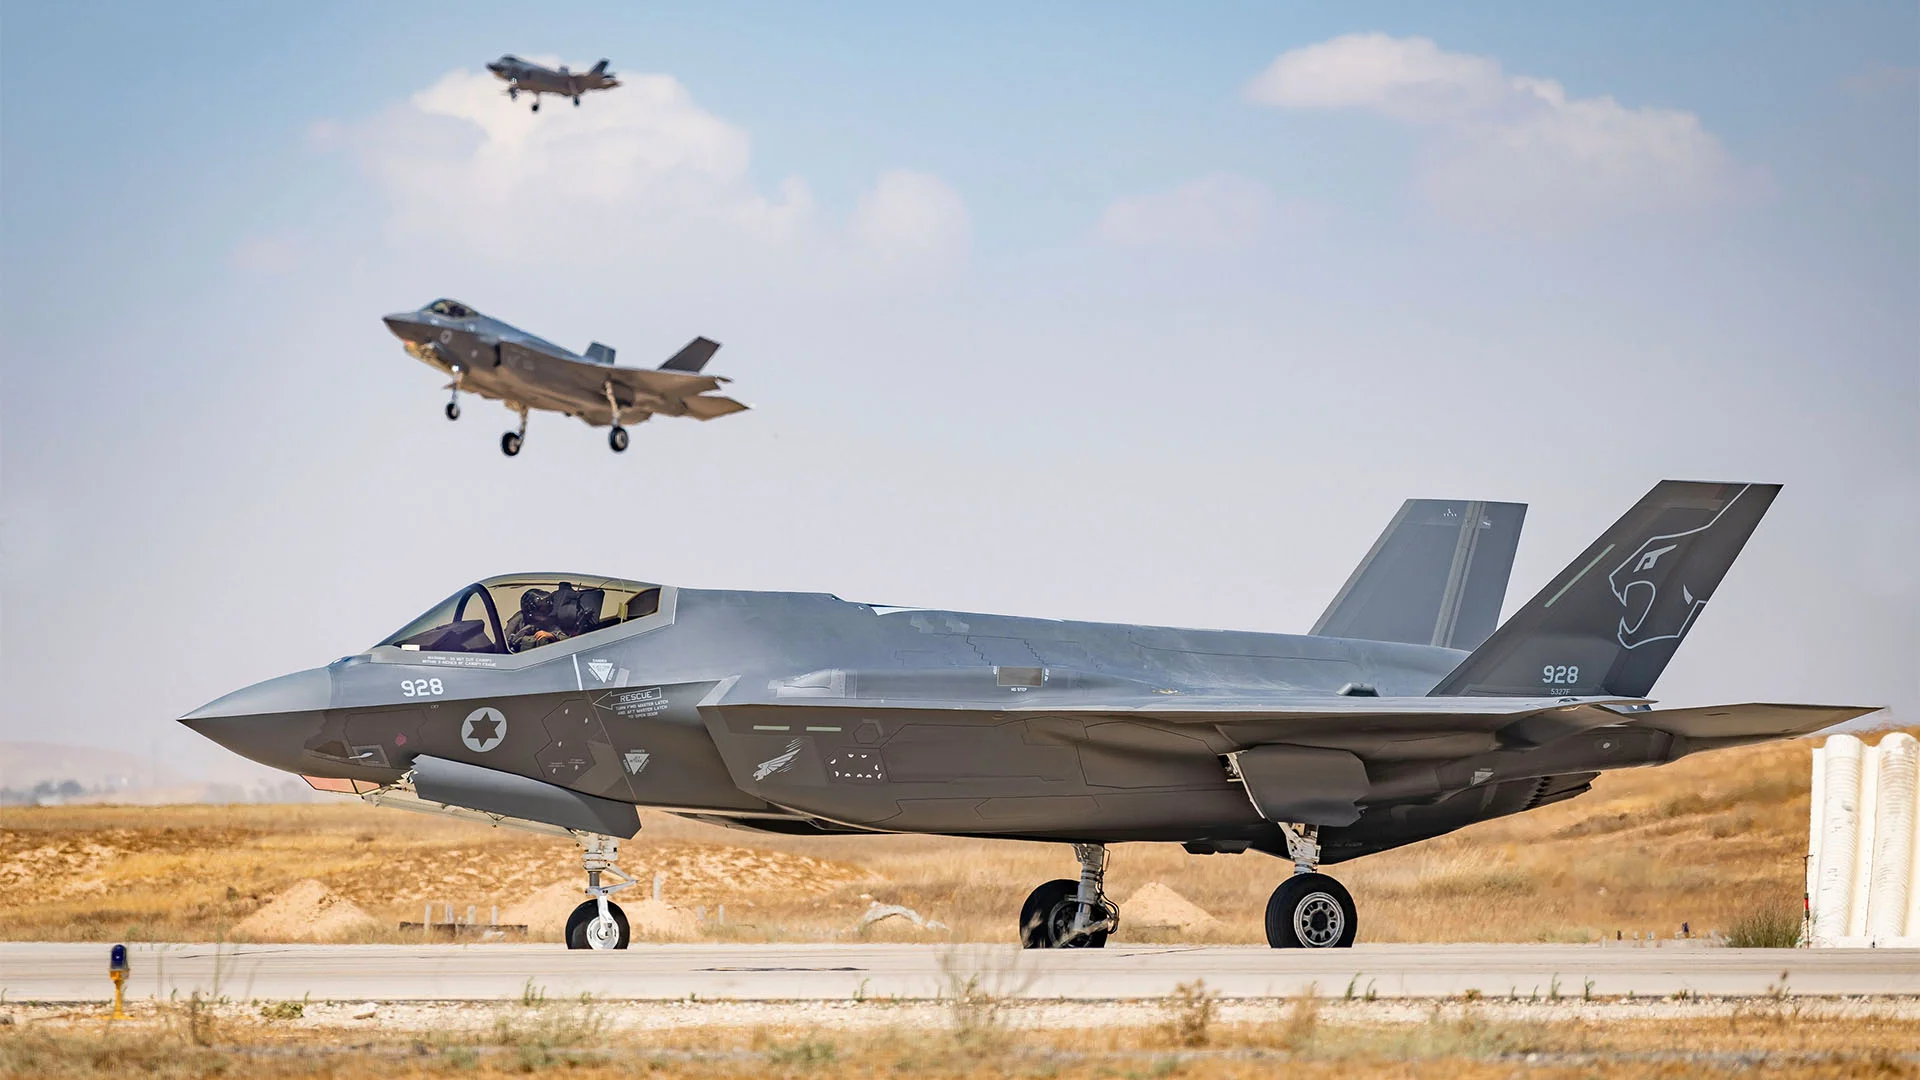 The fifth-generation F-35 Lightning II fighter jet made its first-ever intercept of a cruise missile